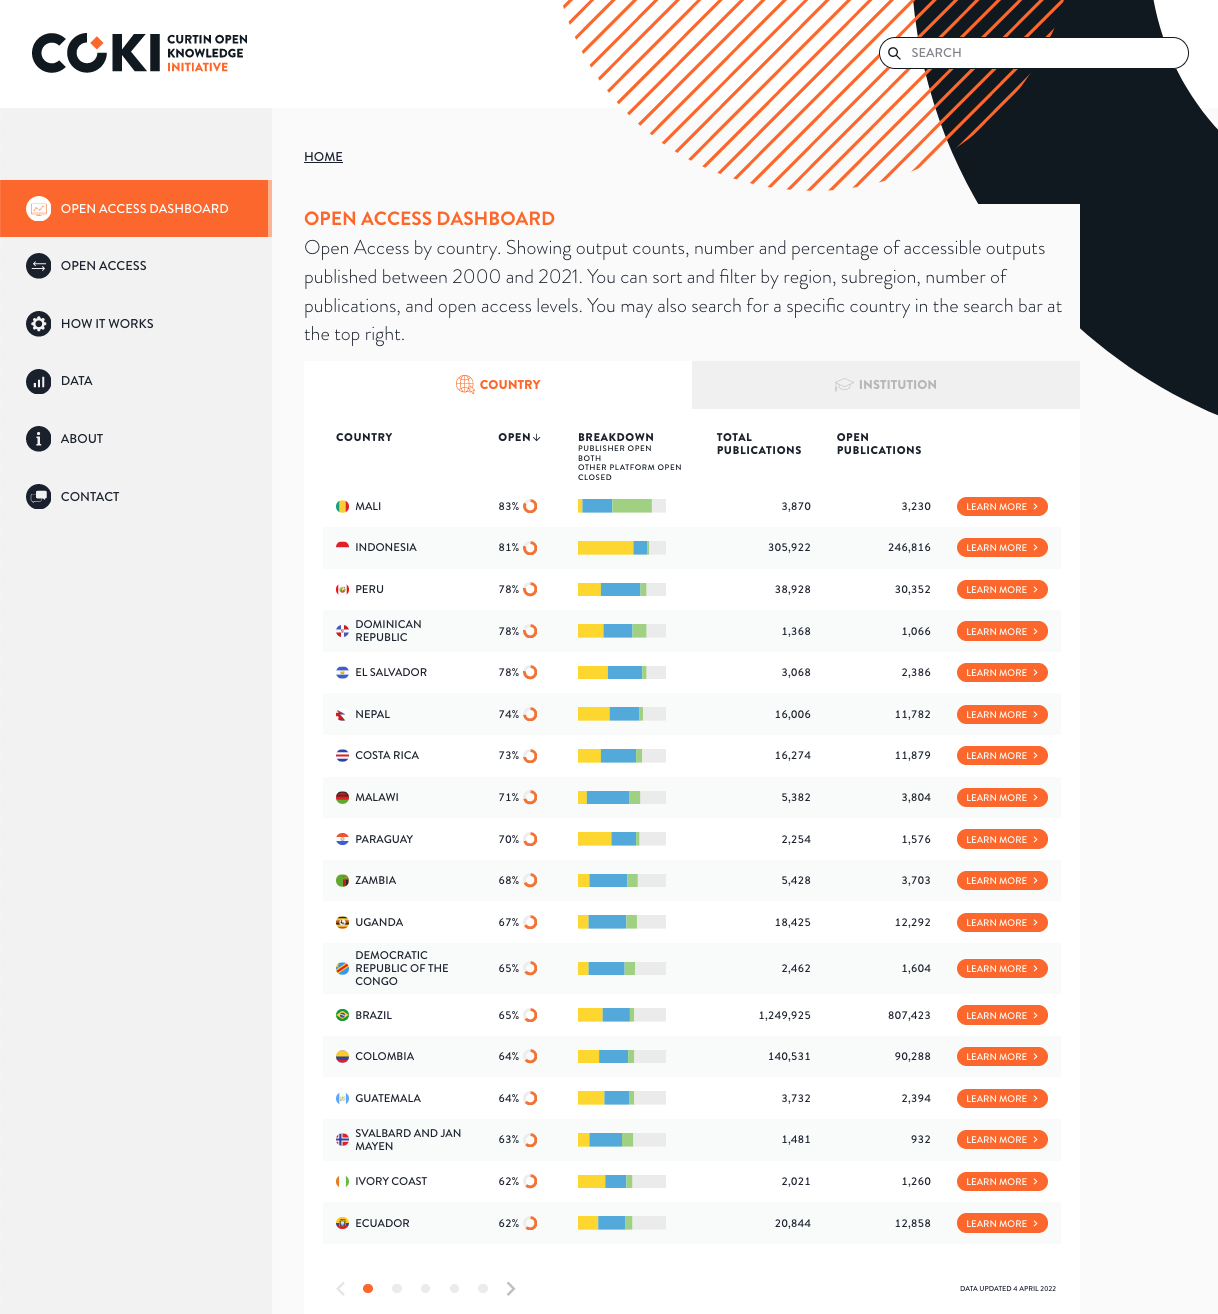 Image of the COKI Open Access Dashboard - click to navigate to the dashboard